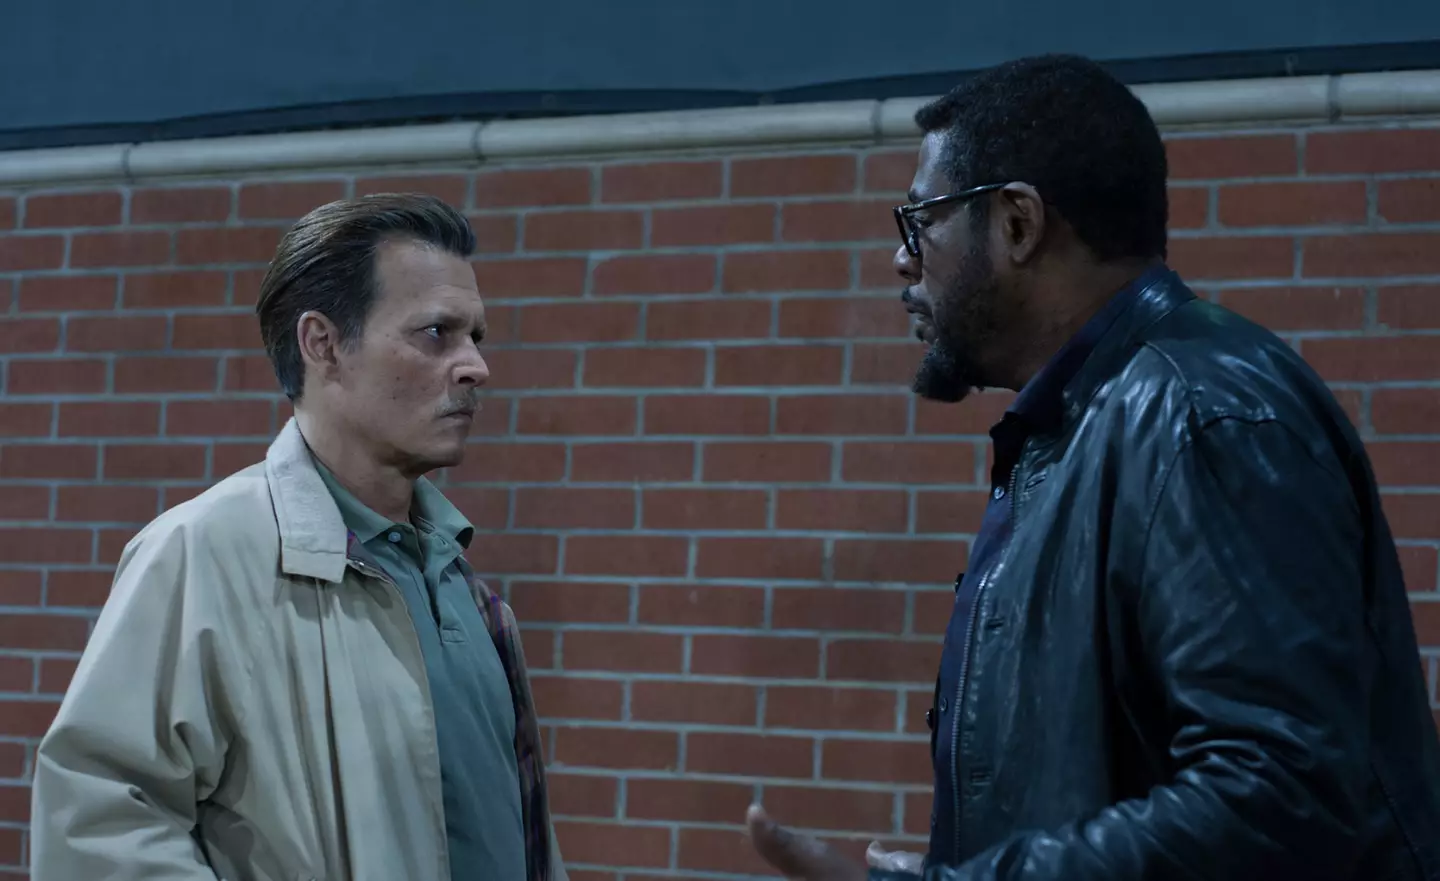 Johnny Depp starred in City of Lies in 2018.